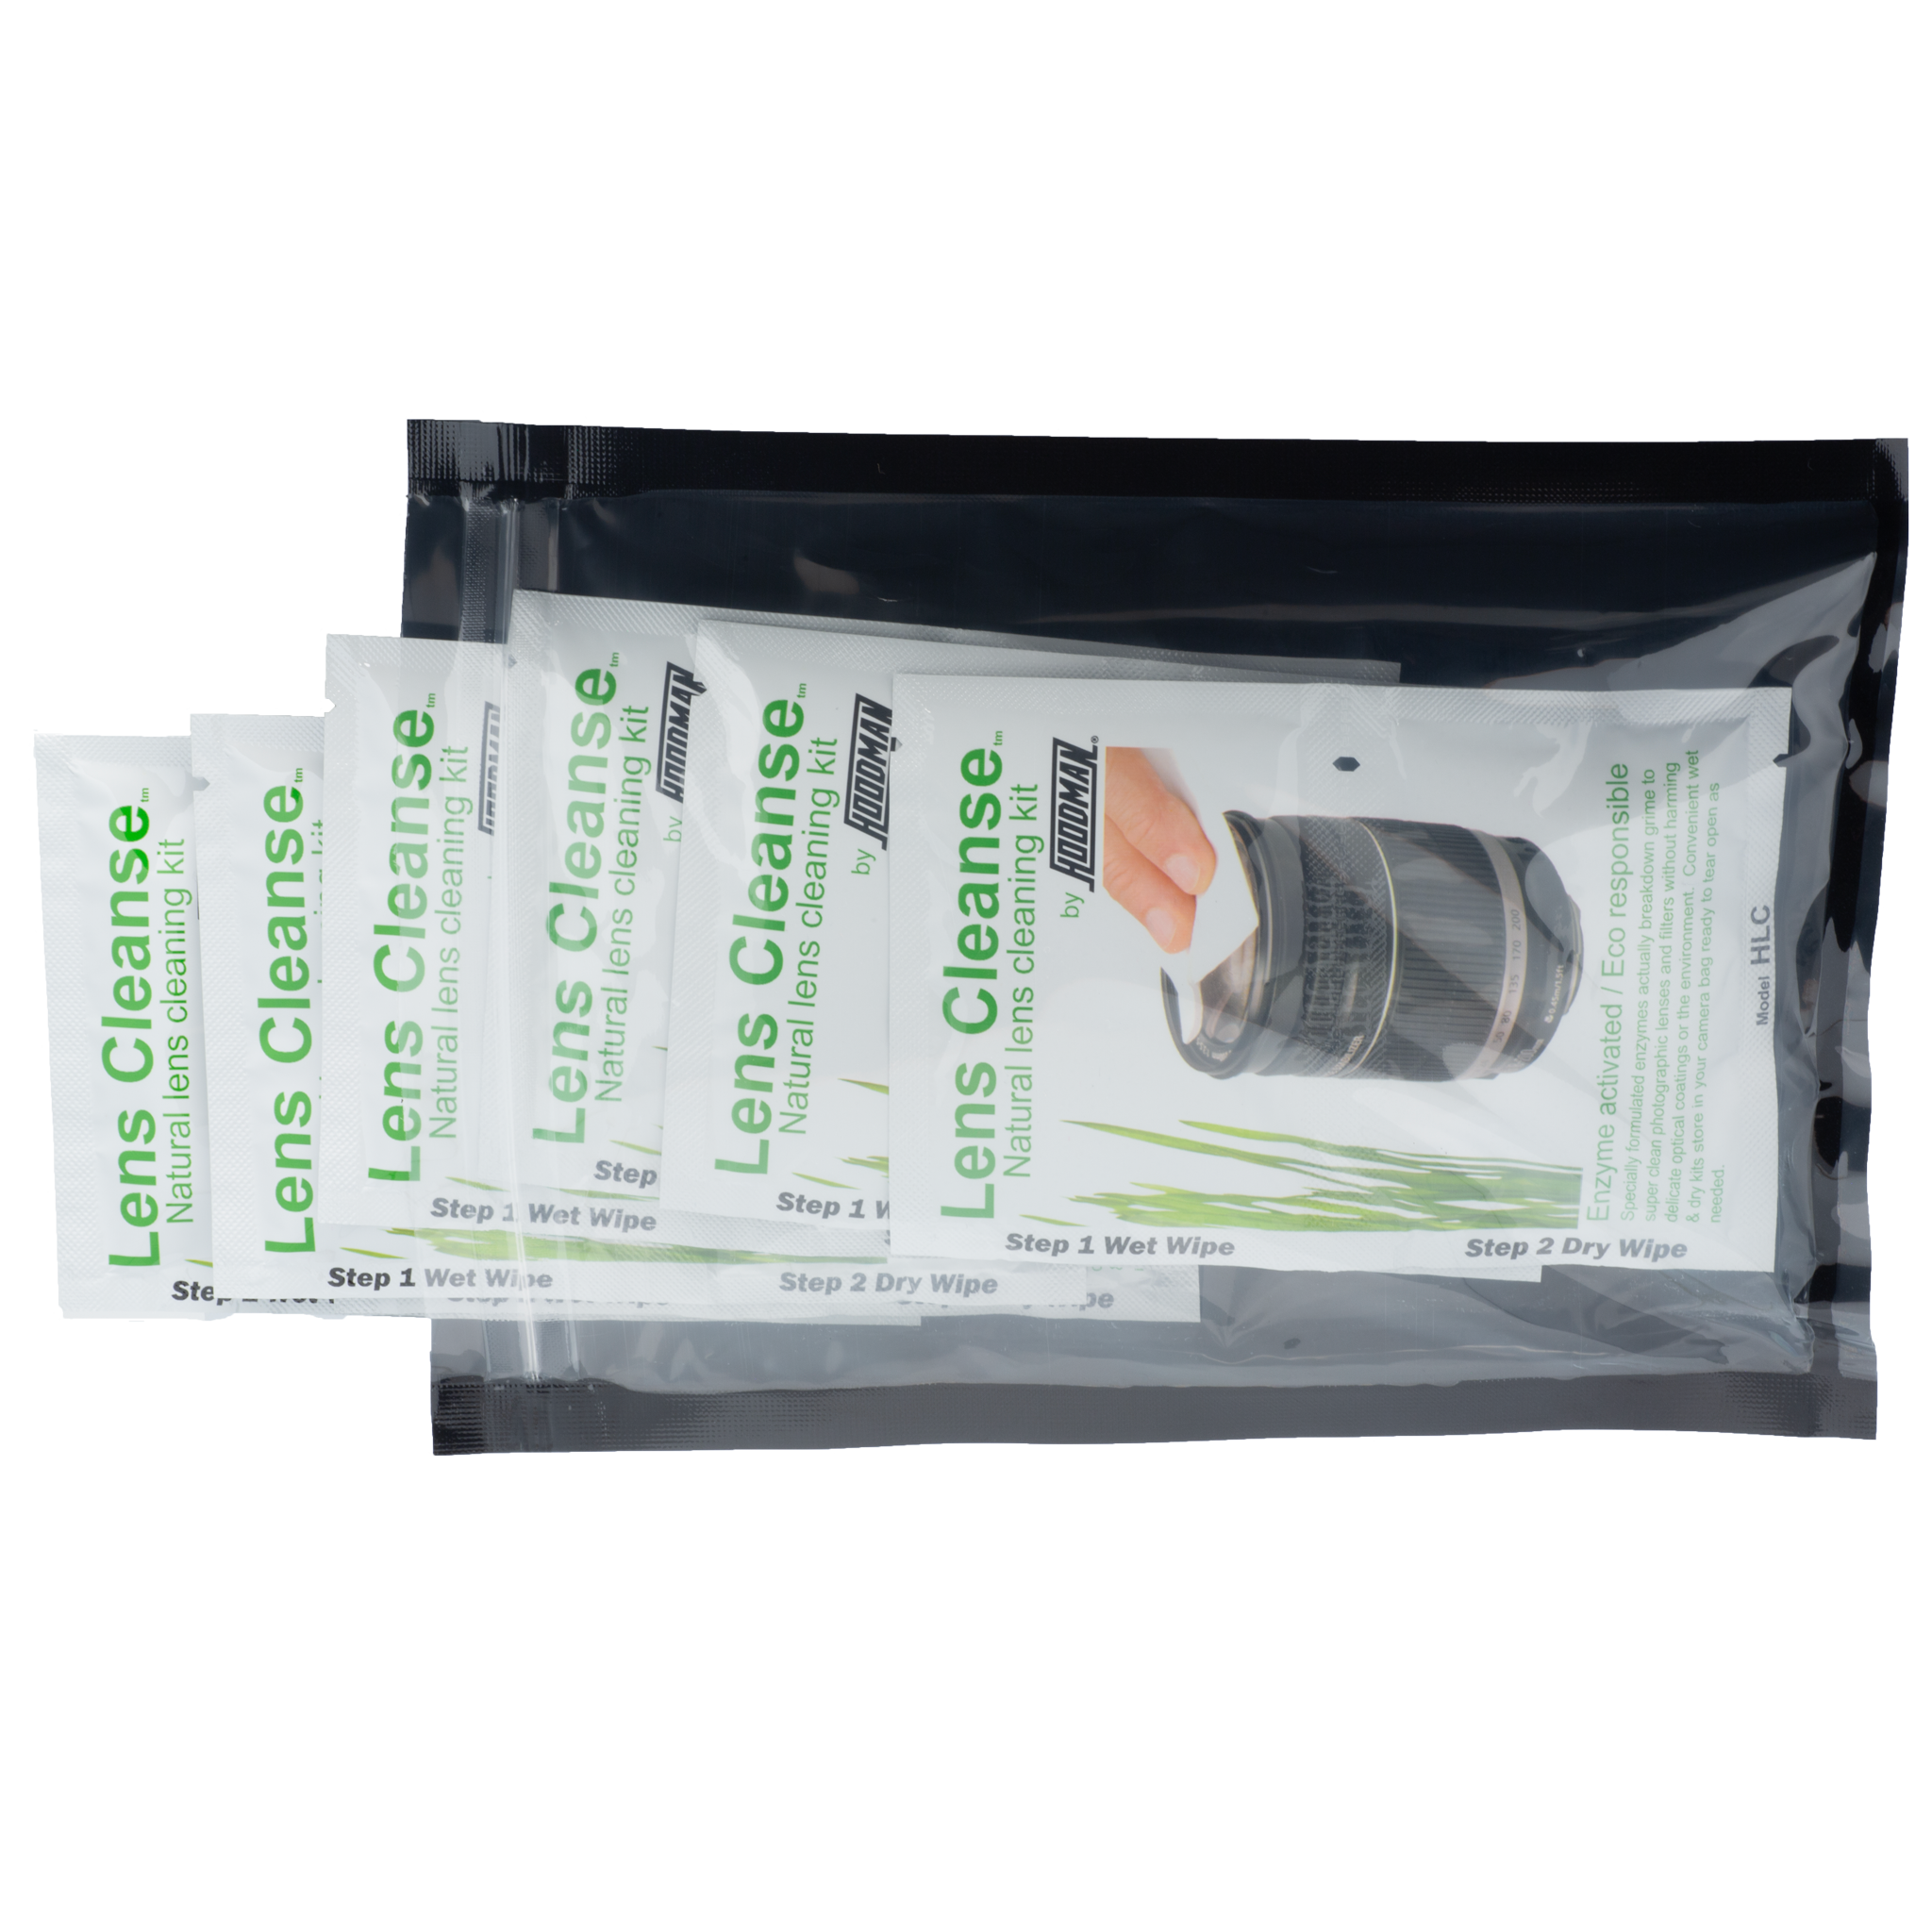 Lens Cleanse Natural Lens Cleaning Kits (12 pack)